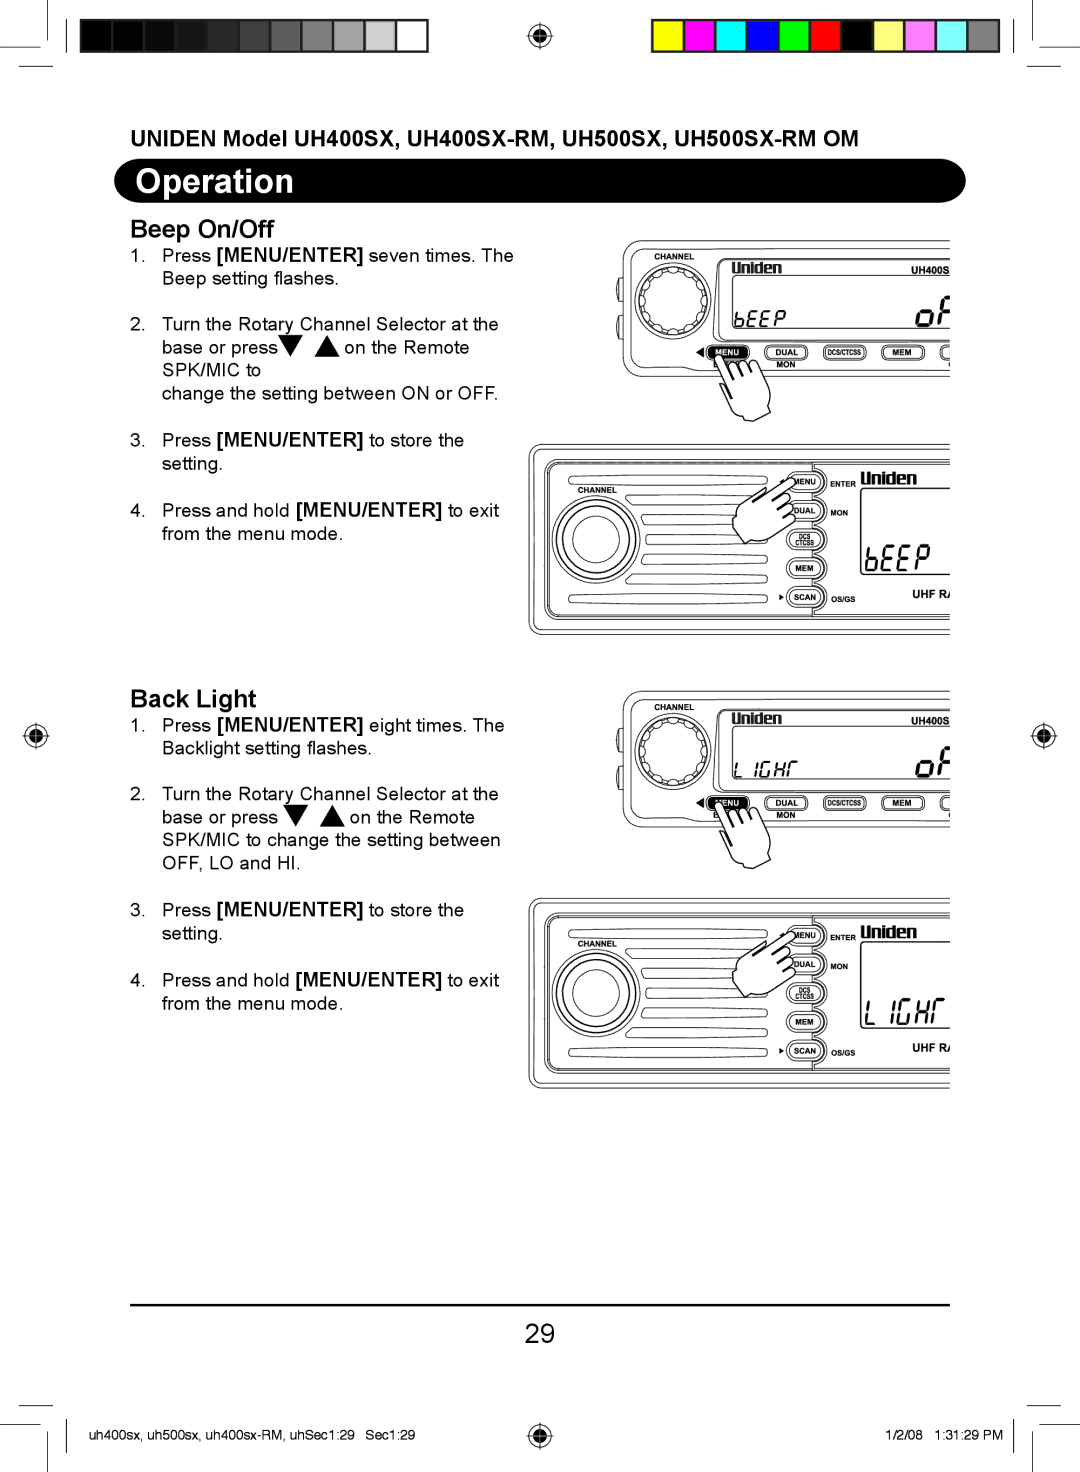 Uniden UH400SX-RM, UH500SX-RM owner manual Beep On/Off, Back Light 